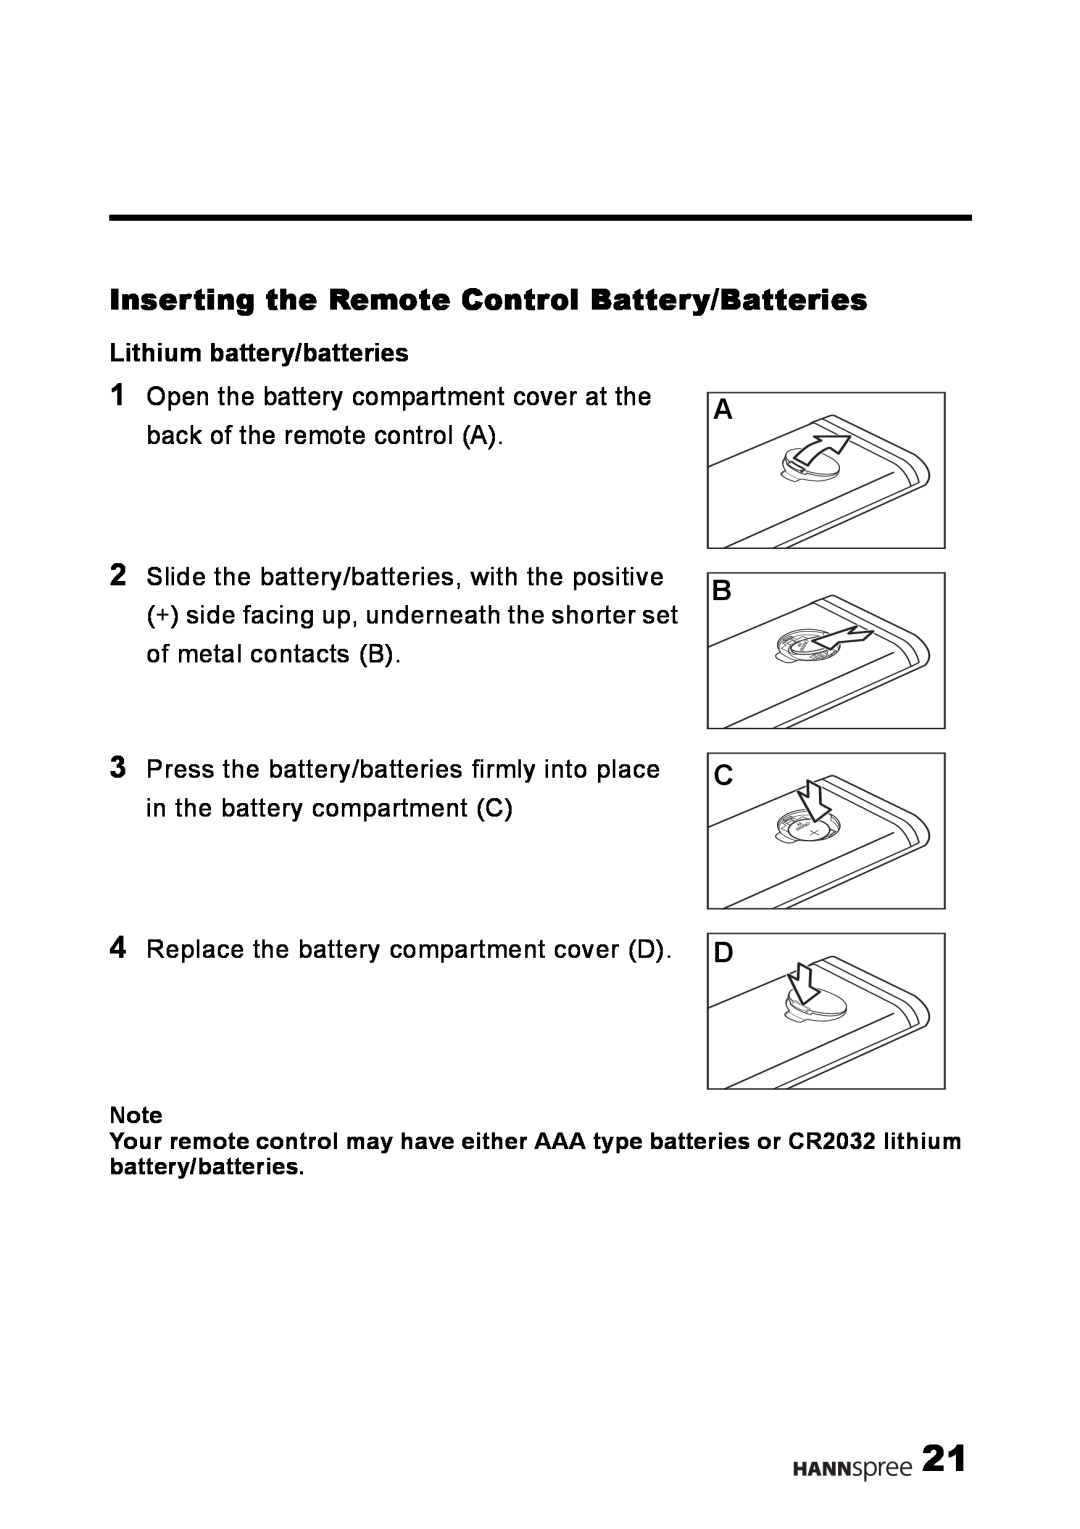 HANNspree LT02-12U1-000 user manual Inserting the Remote Control Battery/Batteries 